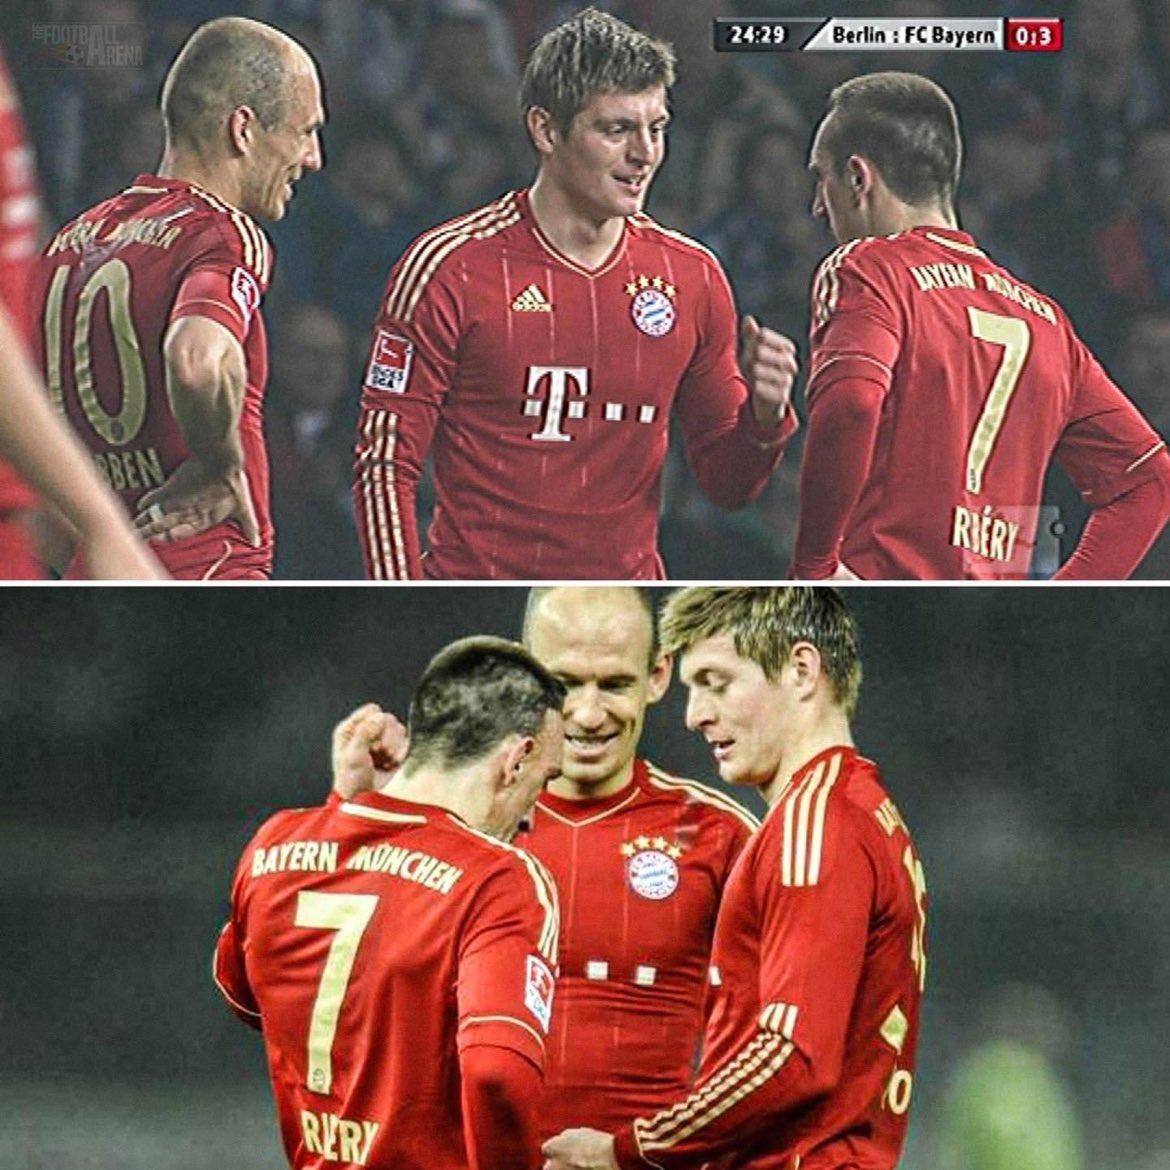 Throwback to when Ribery, Robben and Kroos could not decide on who was going to take the free-kick so they played Rock, Paper, Scissors right in the middle of the pitch to decide. 😂😂😂